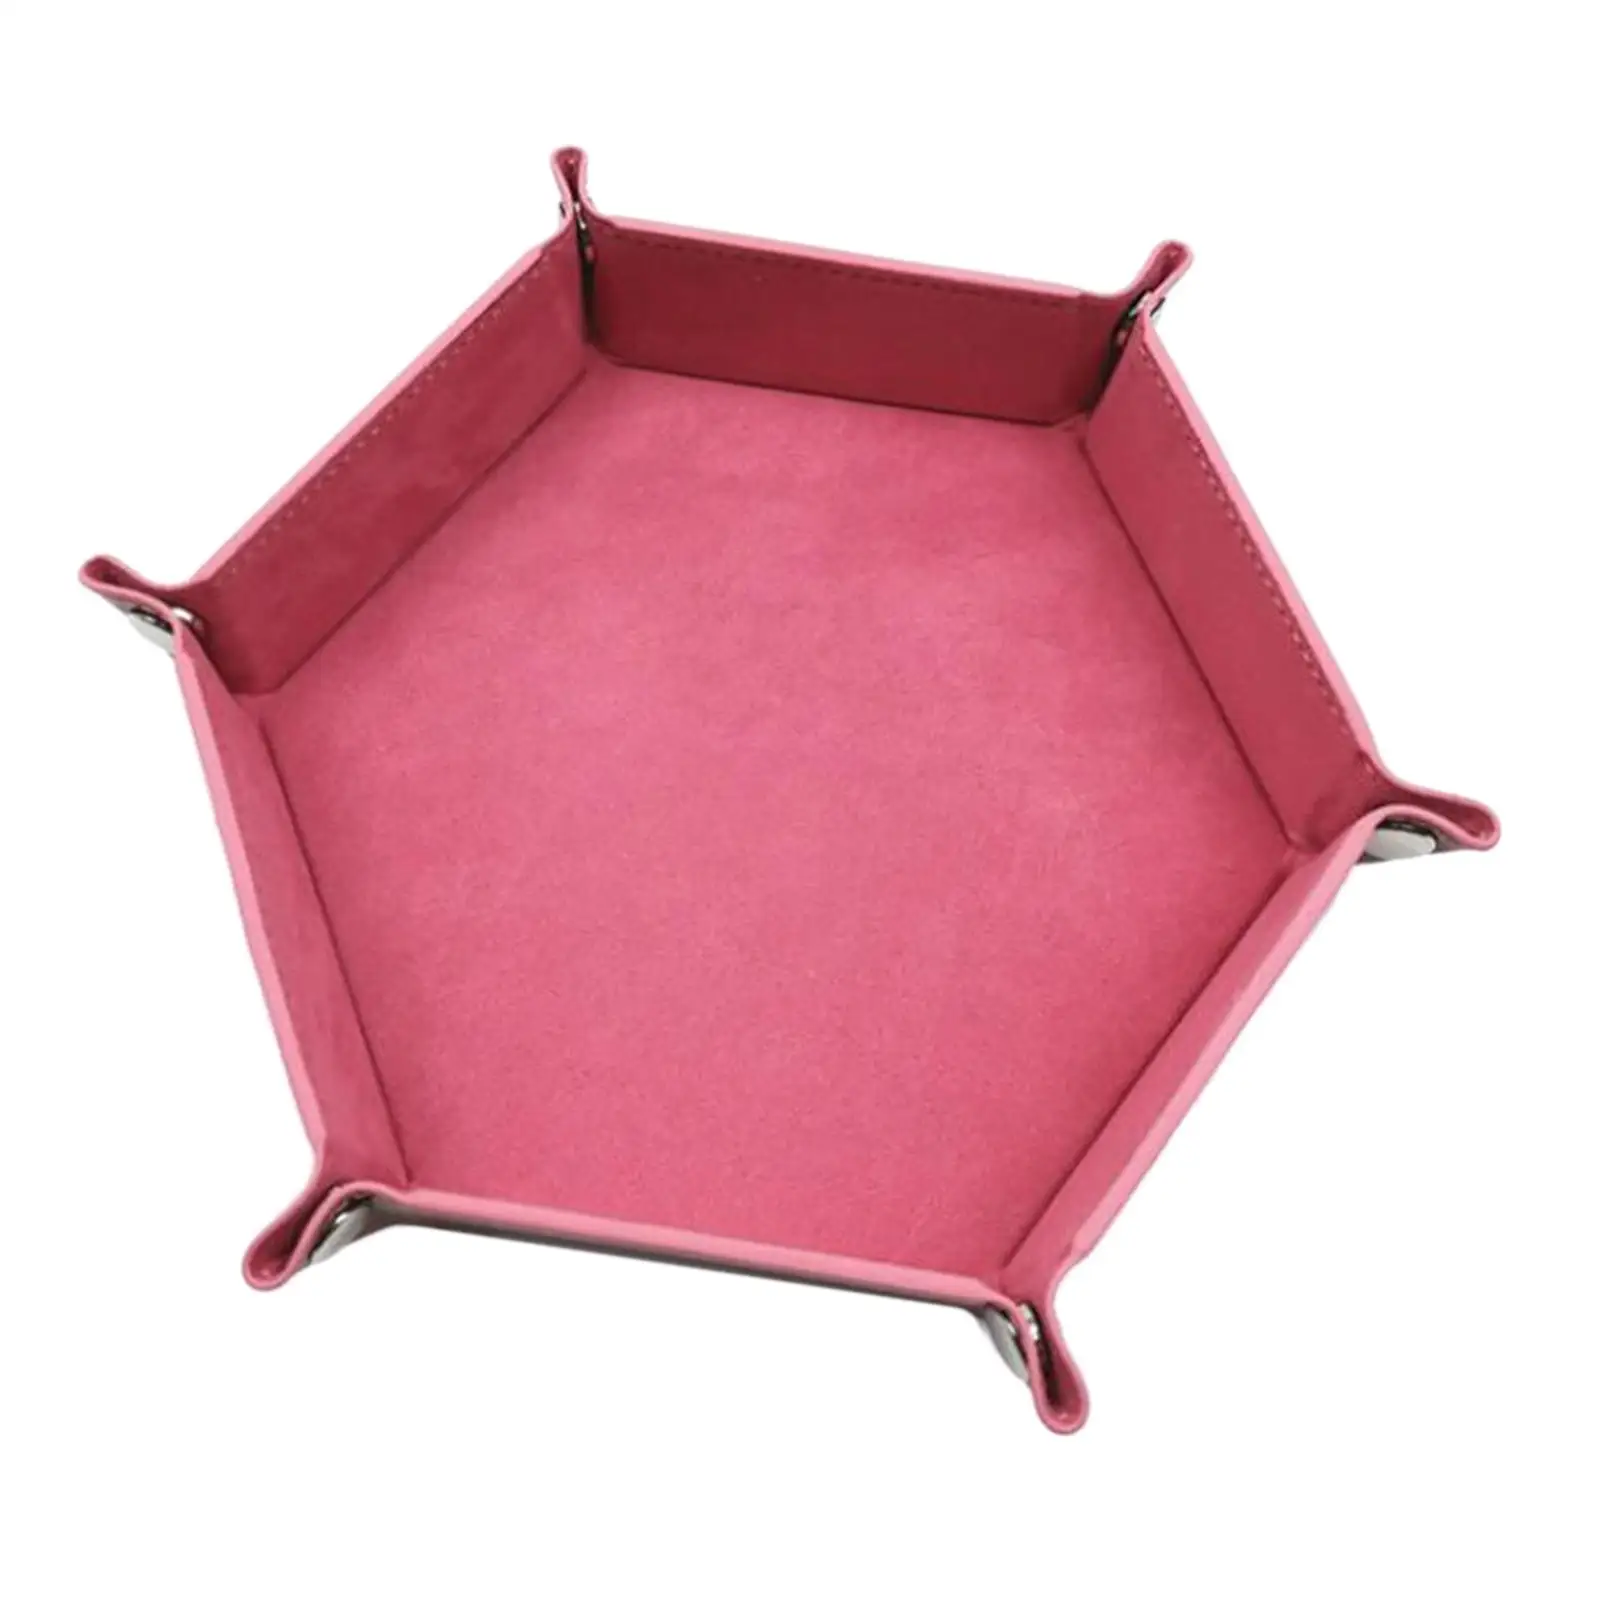  Tray Double Sided Portable Durable for Accessories Candies Jewelry